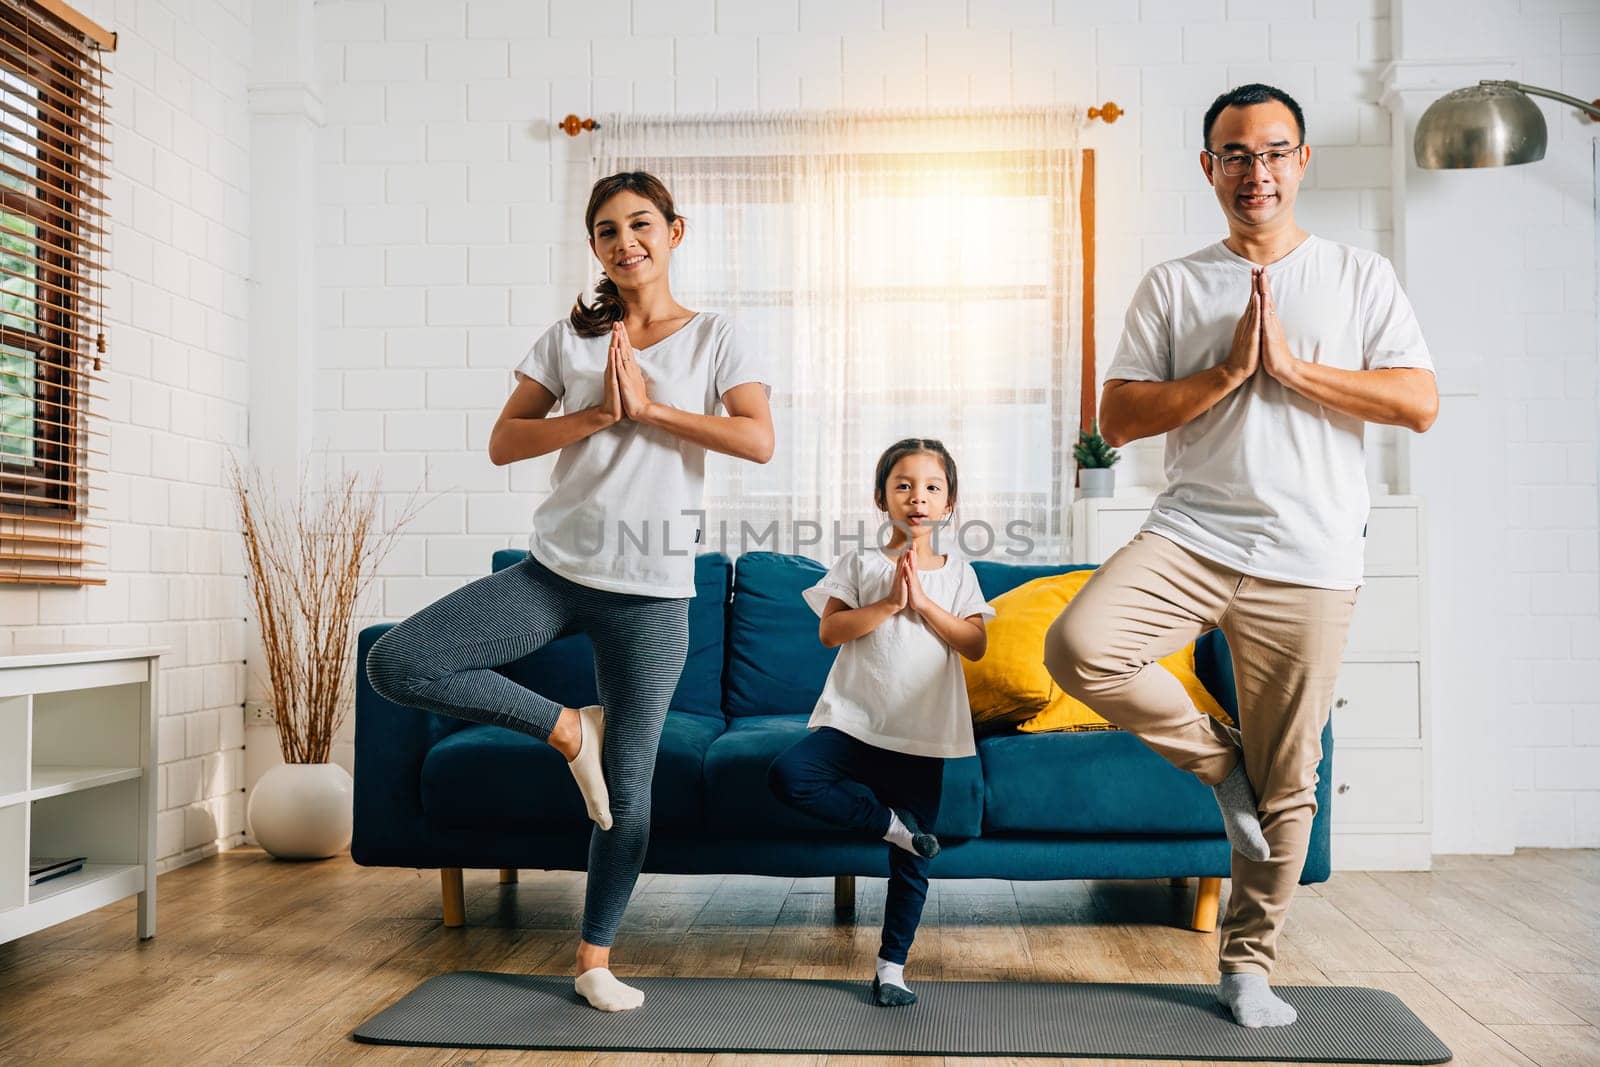 Asian parents and their daughter bond through yoga and fitness training on the living room floor emphasizing health happiness and togetherness during their family weekend.